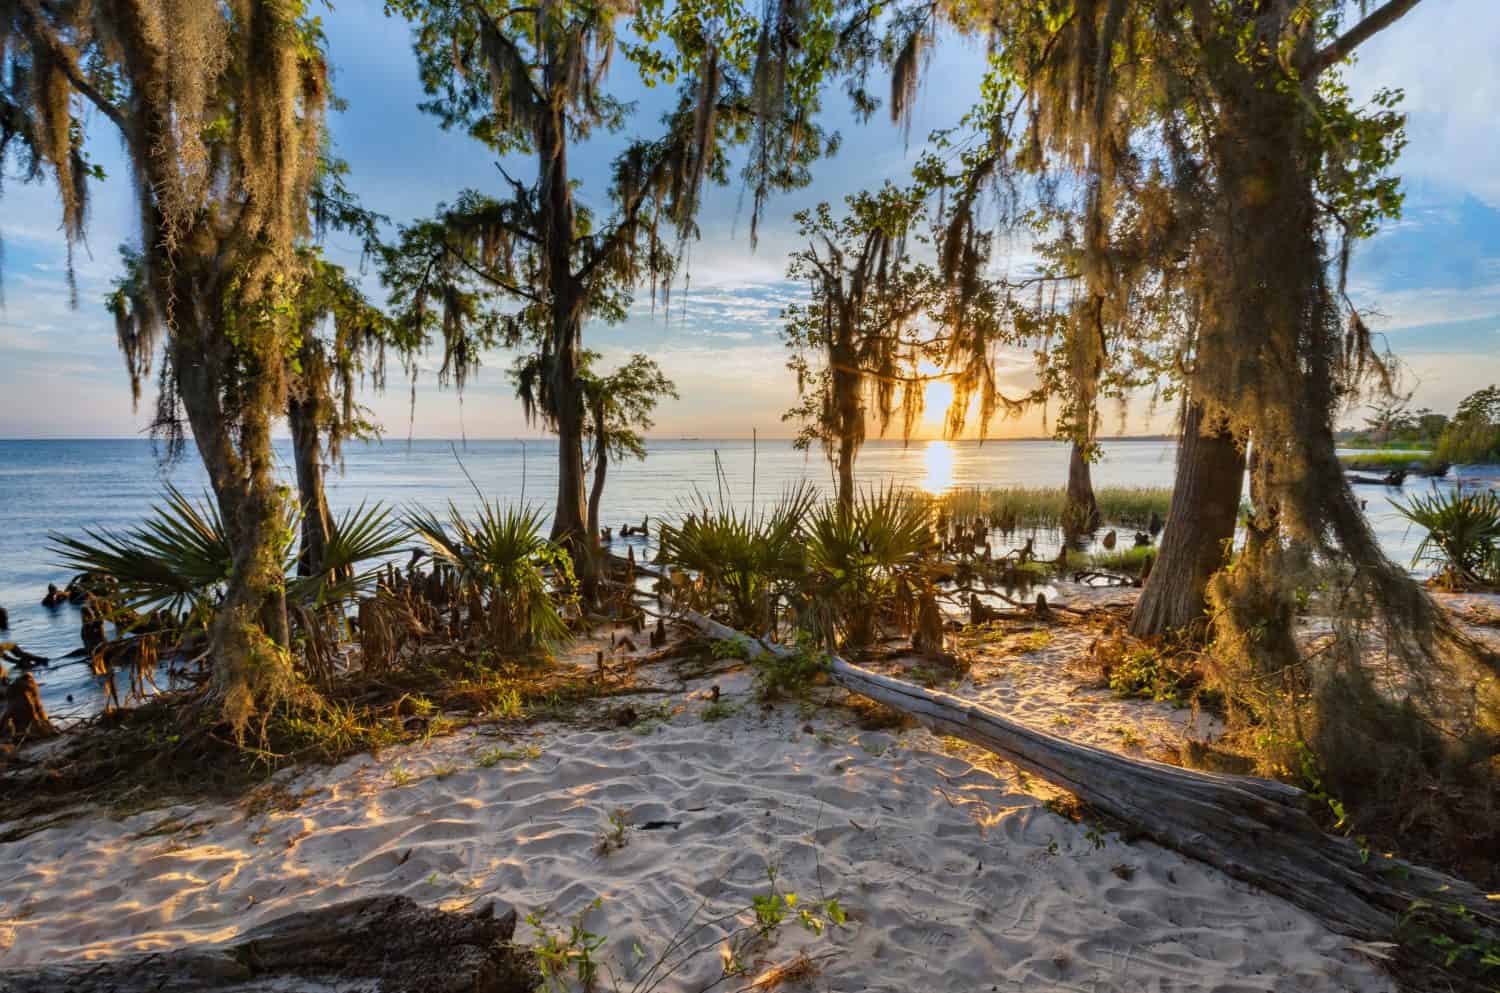 Fontainebleau State Park is a beautiful park in Louisiana. This may be one of my favorite images in my portfolio. The memories behind the pictures tell the biggest story.